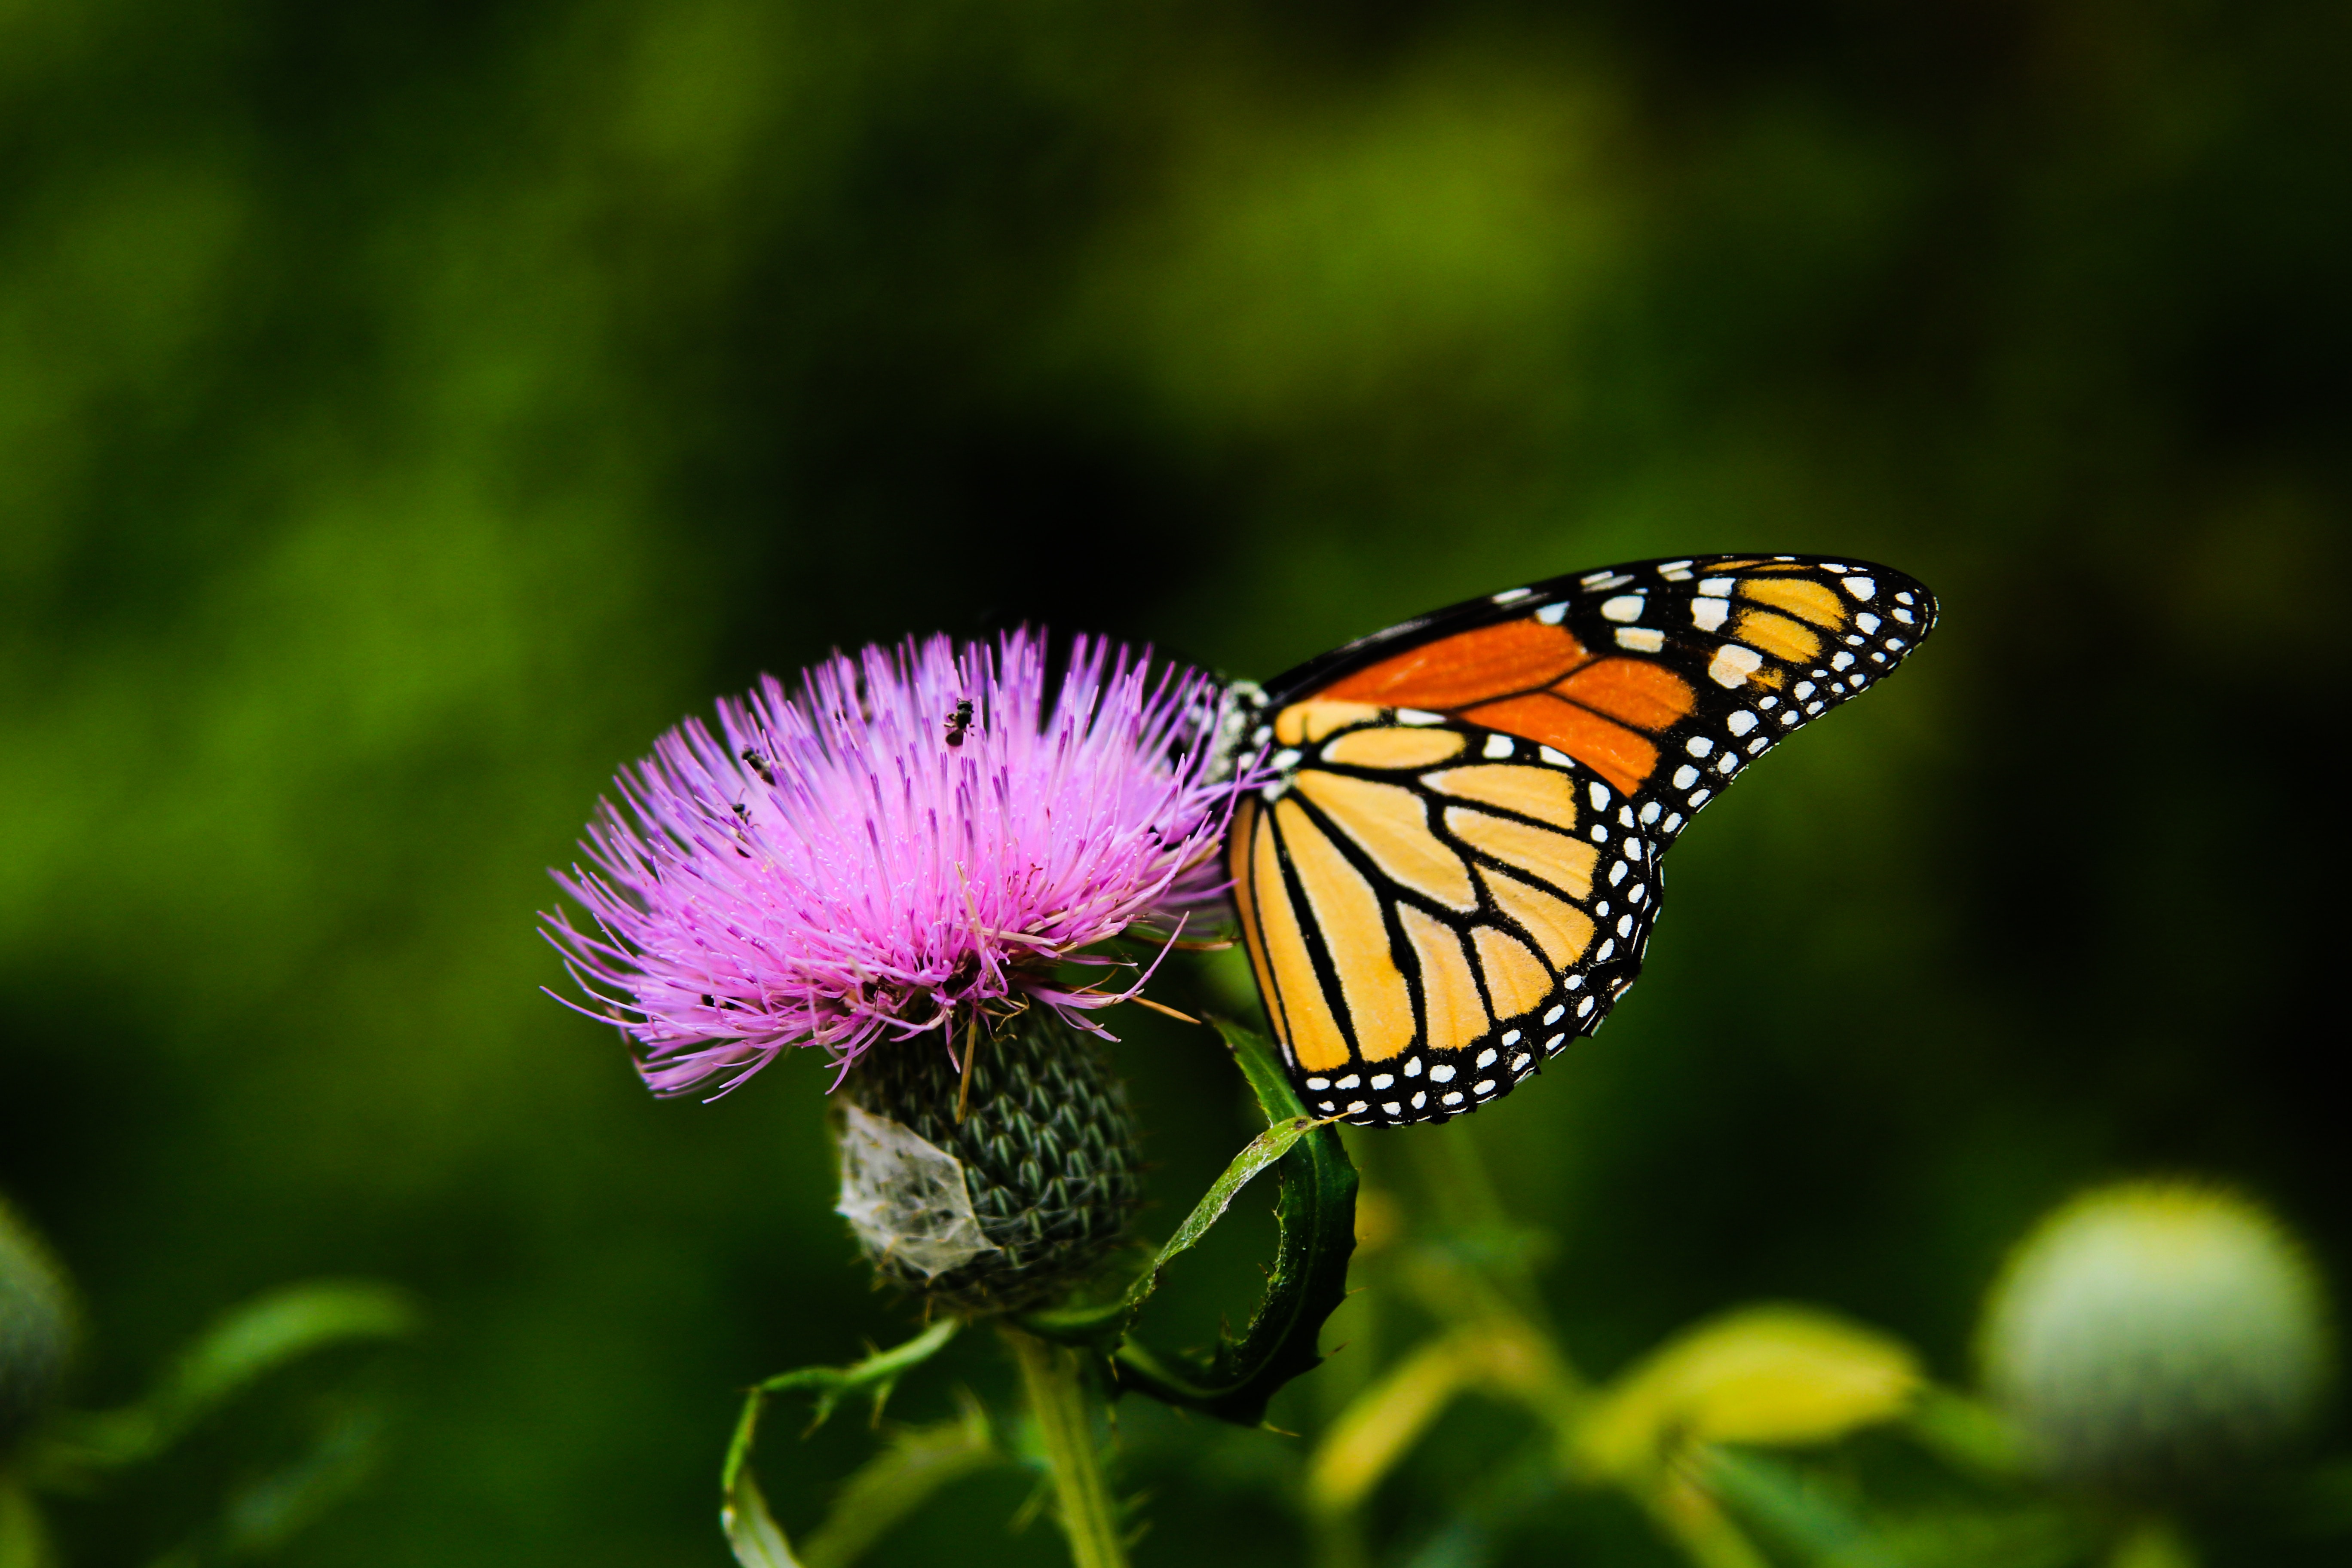 Monarch butterfly on a purple creeping thistle flower; image by Sean Stratton, via Unsplash.com